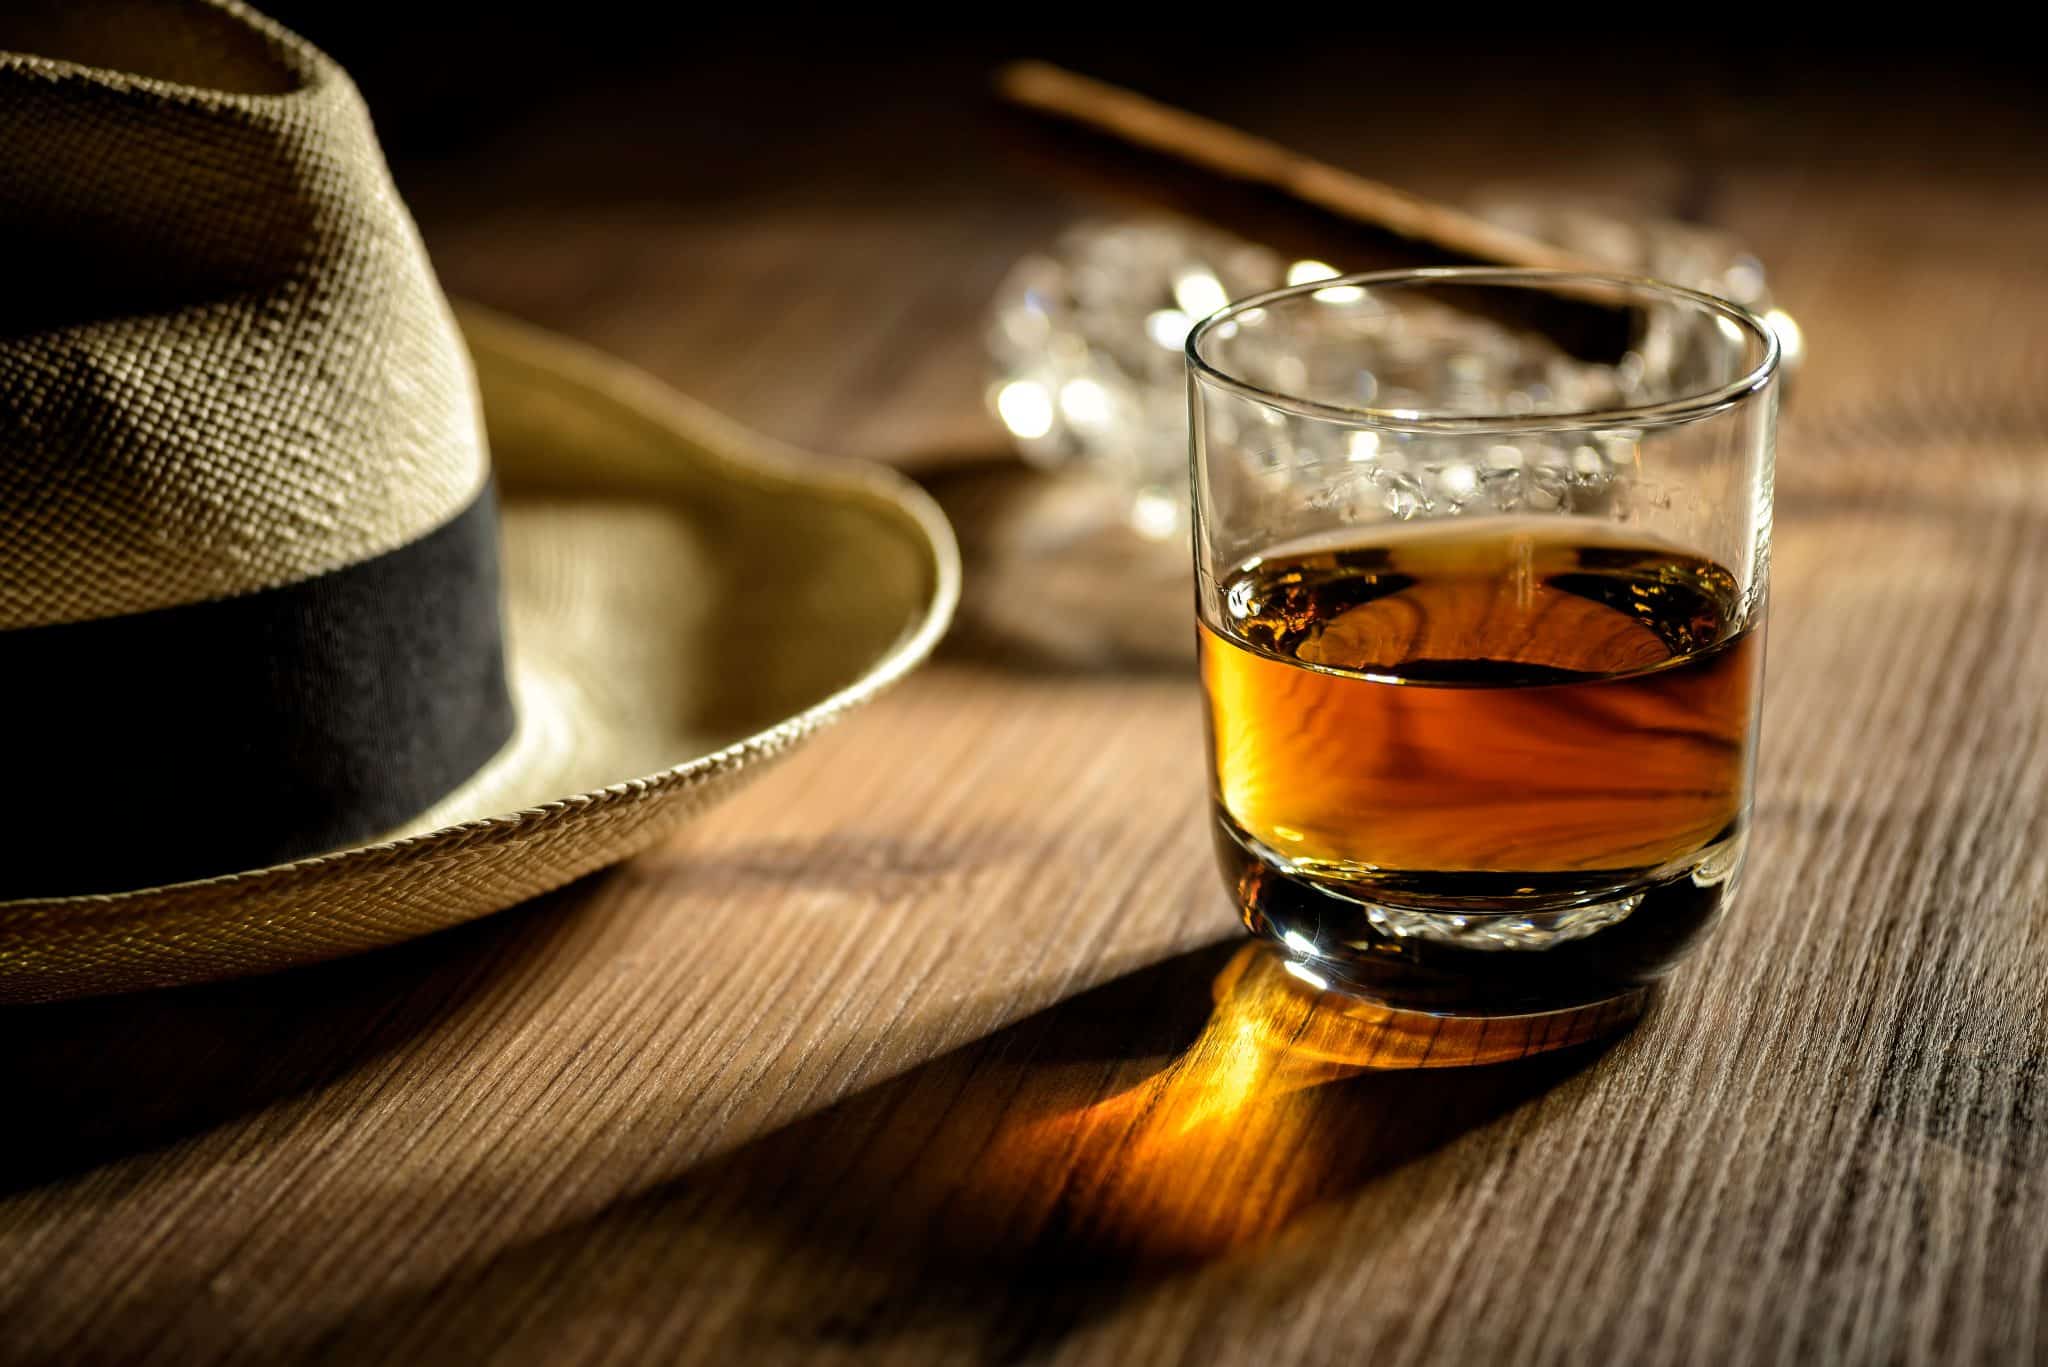 A glass of neat rum, a straw hat, and a cheroot on a wooden surface.